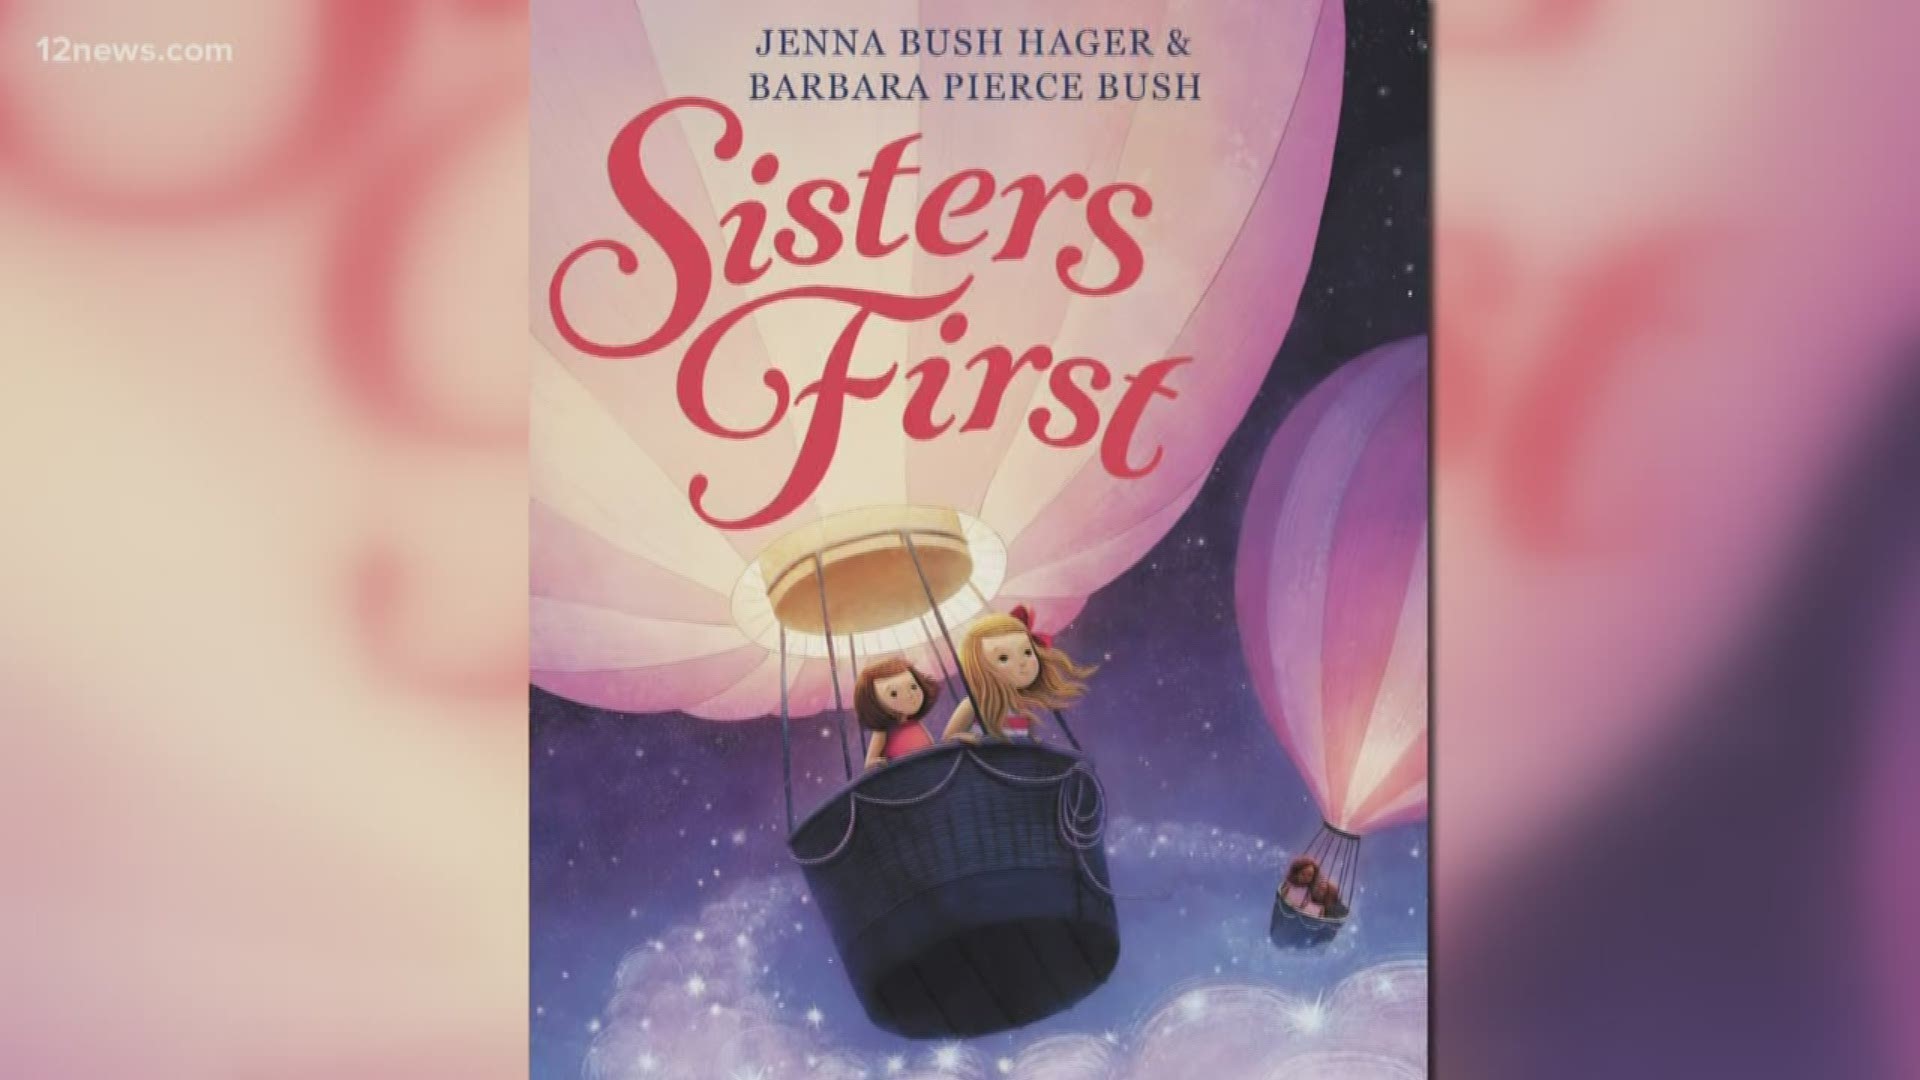 Jenna Bush Hager and Barbara Pierce Bush joined Today in AZ's Paul Gerke and Rachel McNeill to talk all about their new book, "Sisters First."